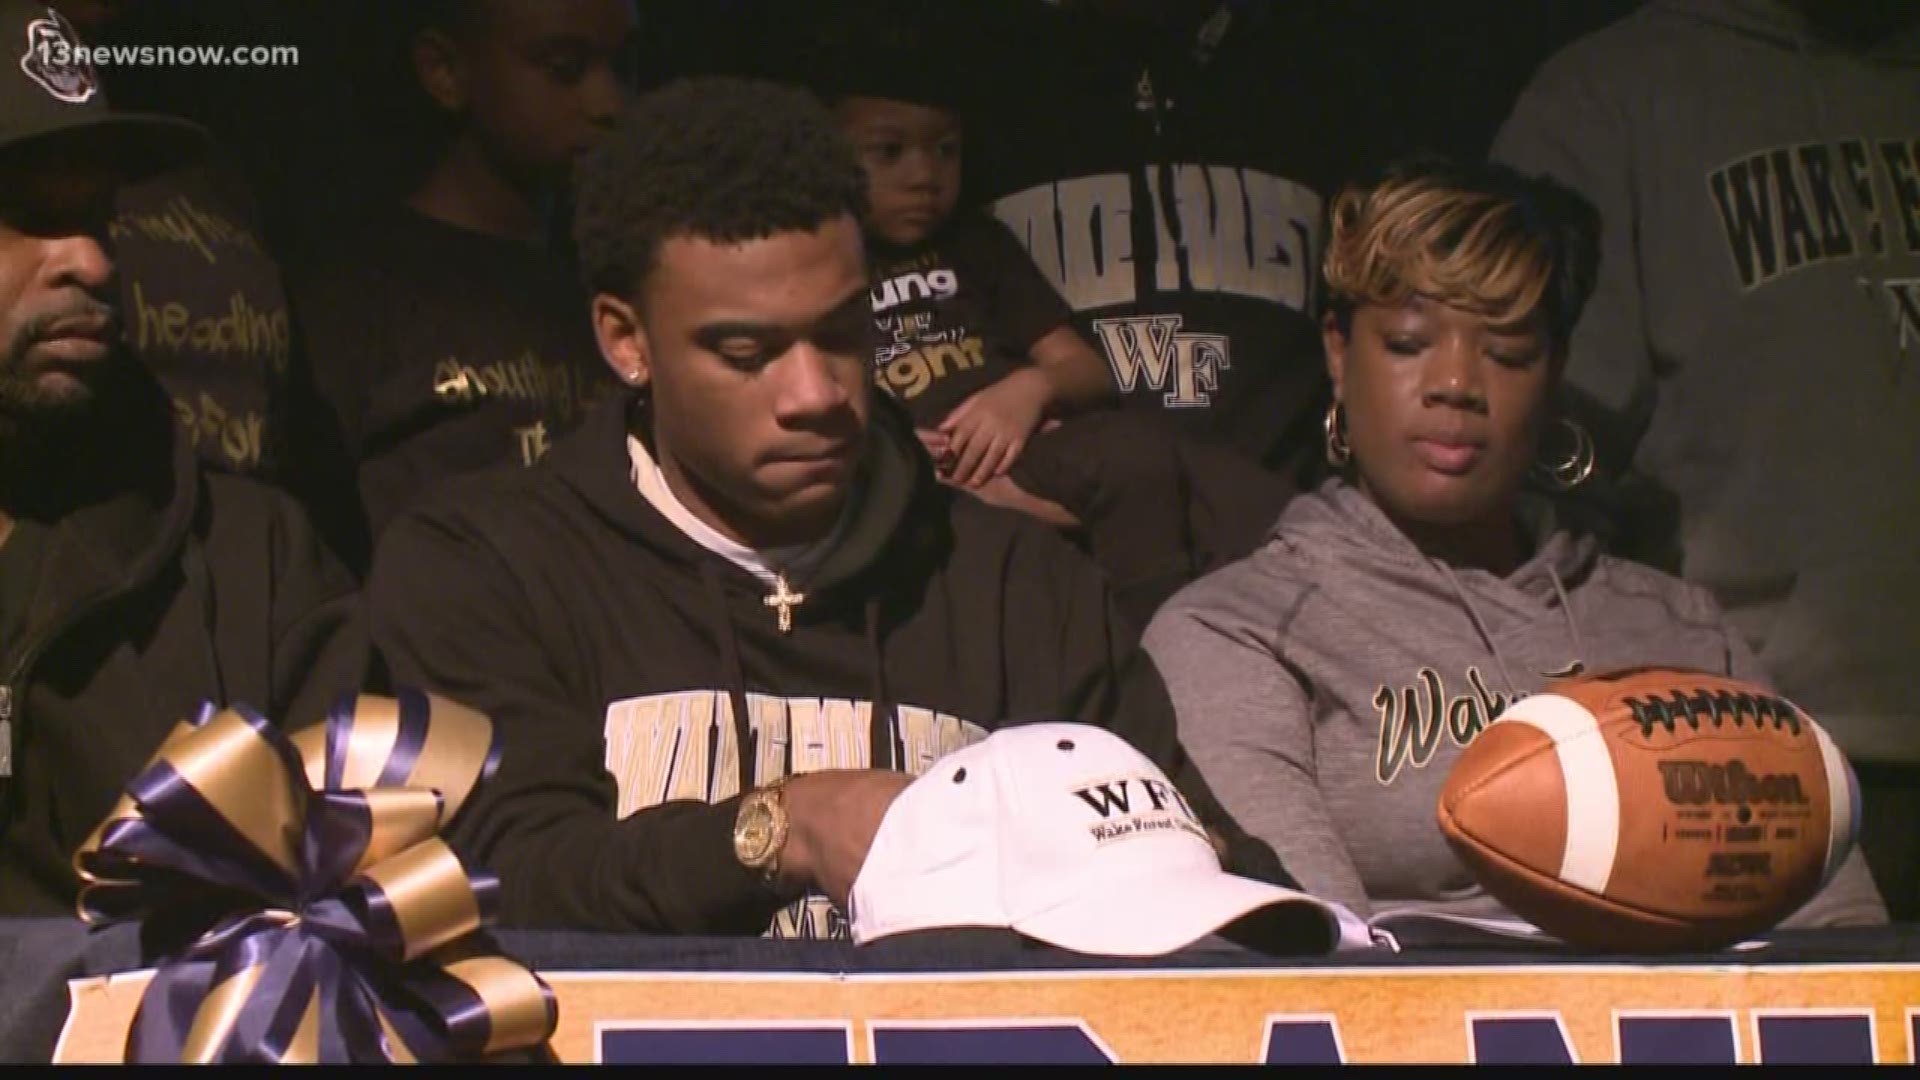 Among the big names signing on the dotted line on Wednesday was Franklin High School tight end, Drelyn Ford. The 6-5, 200 pounder is headed to Winston Salem, North Carolina to play at Wake Forest.